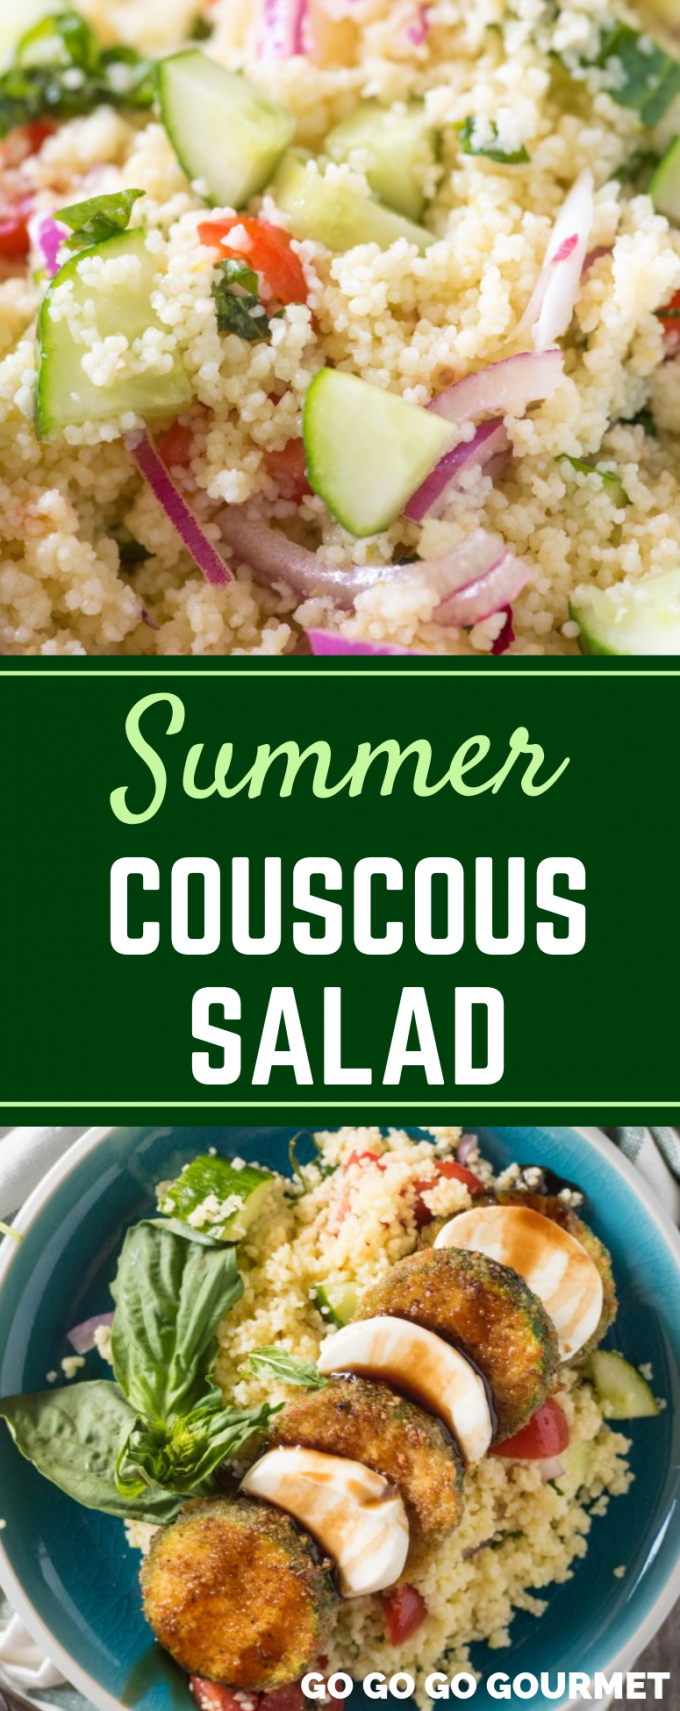 This easy Summer Couscous Salad with Lemon Basil Dressing is full of Mediterranean flavor. Served cold, this is one of those great healthy recipes that is perfect for potlucks or summer BBQs! #gogogogourmet #summercoucoussalad #couscoussalad #summerbbqrecipes via @gogogogourmet